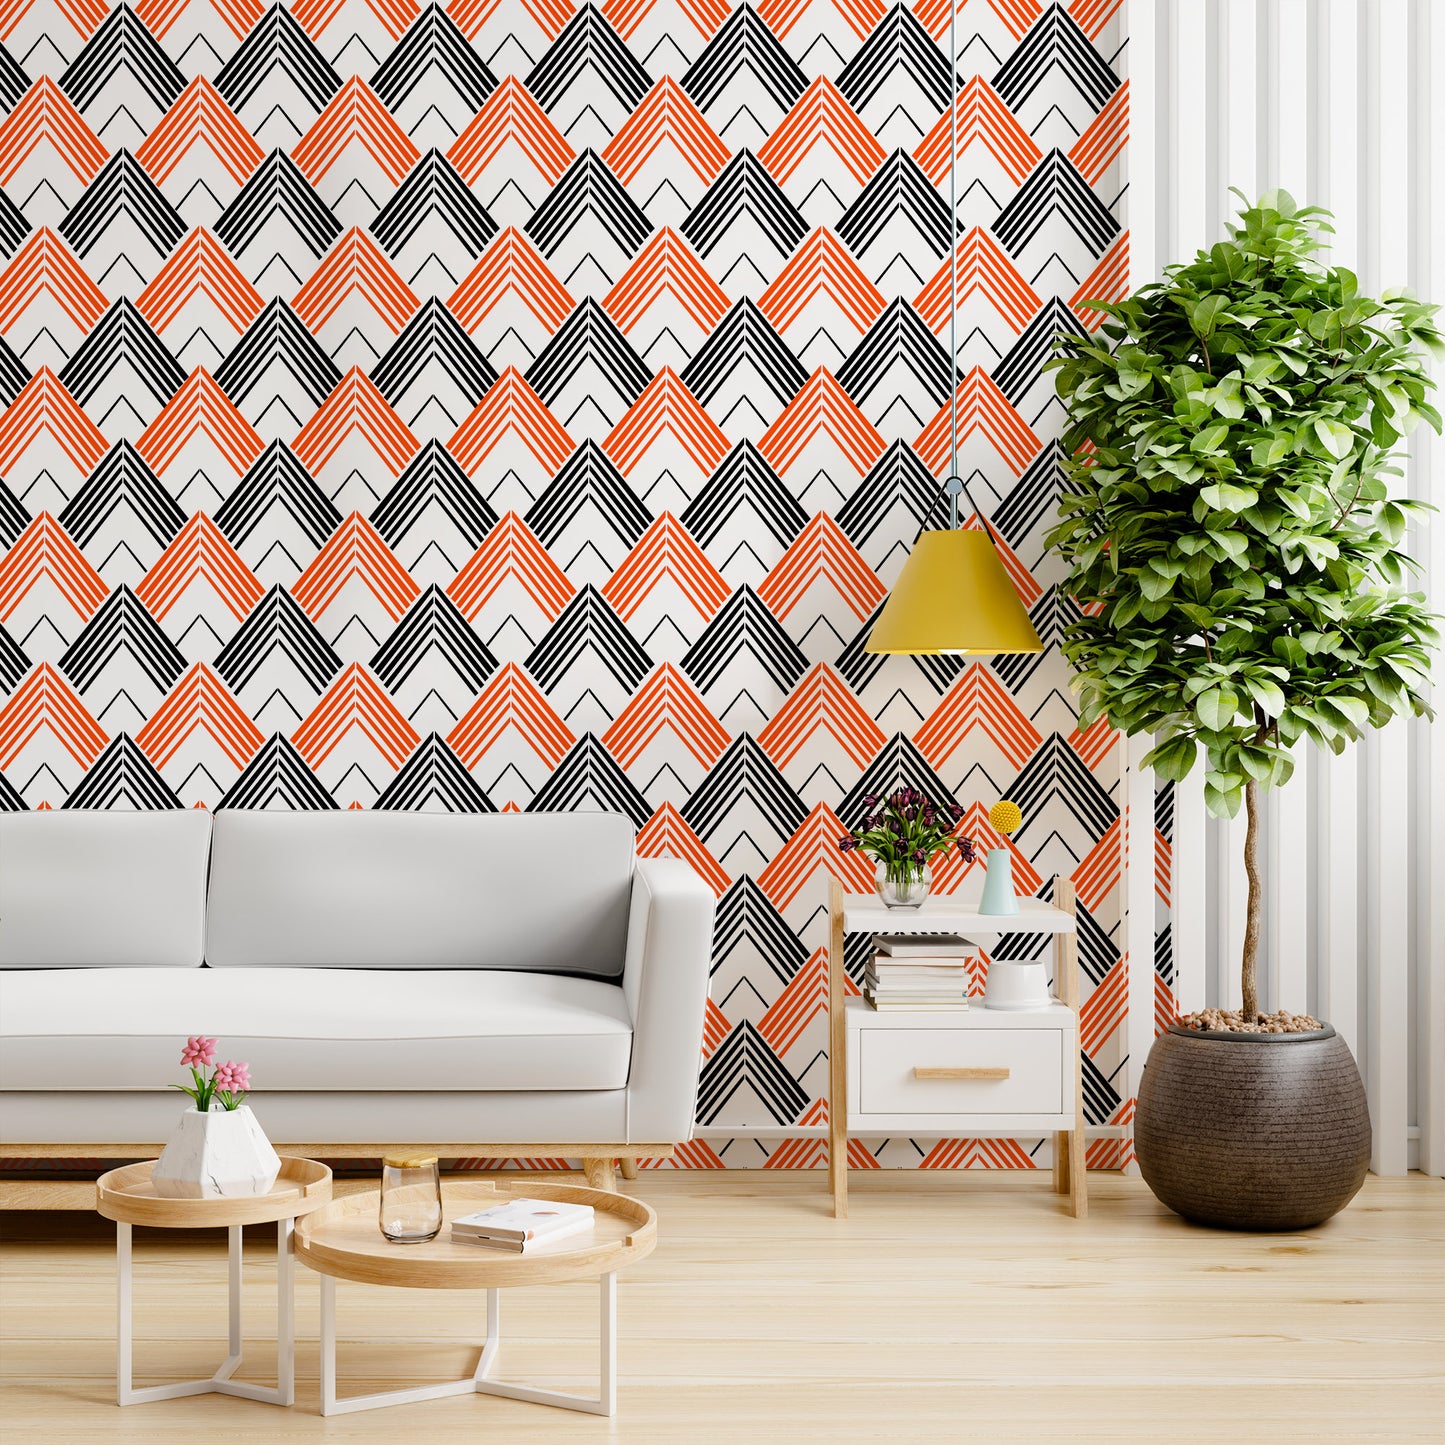 Pyramid Pattern Design Stencil for Wall Painting (KDMD1458)